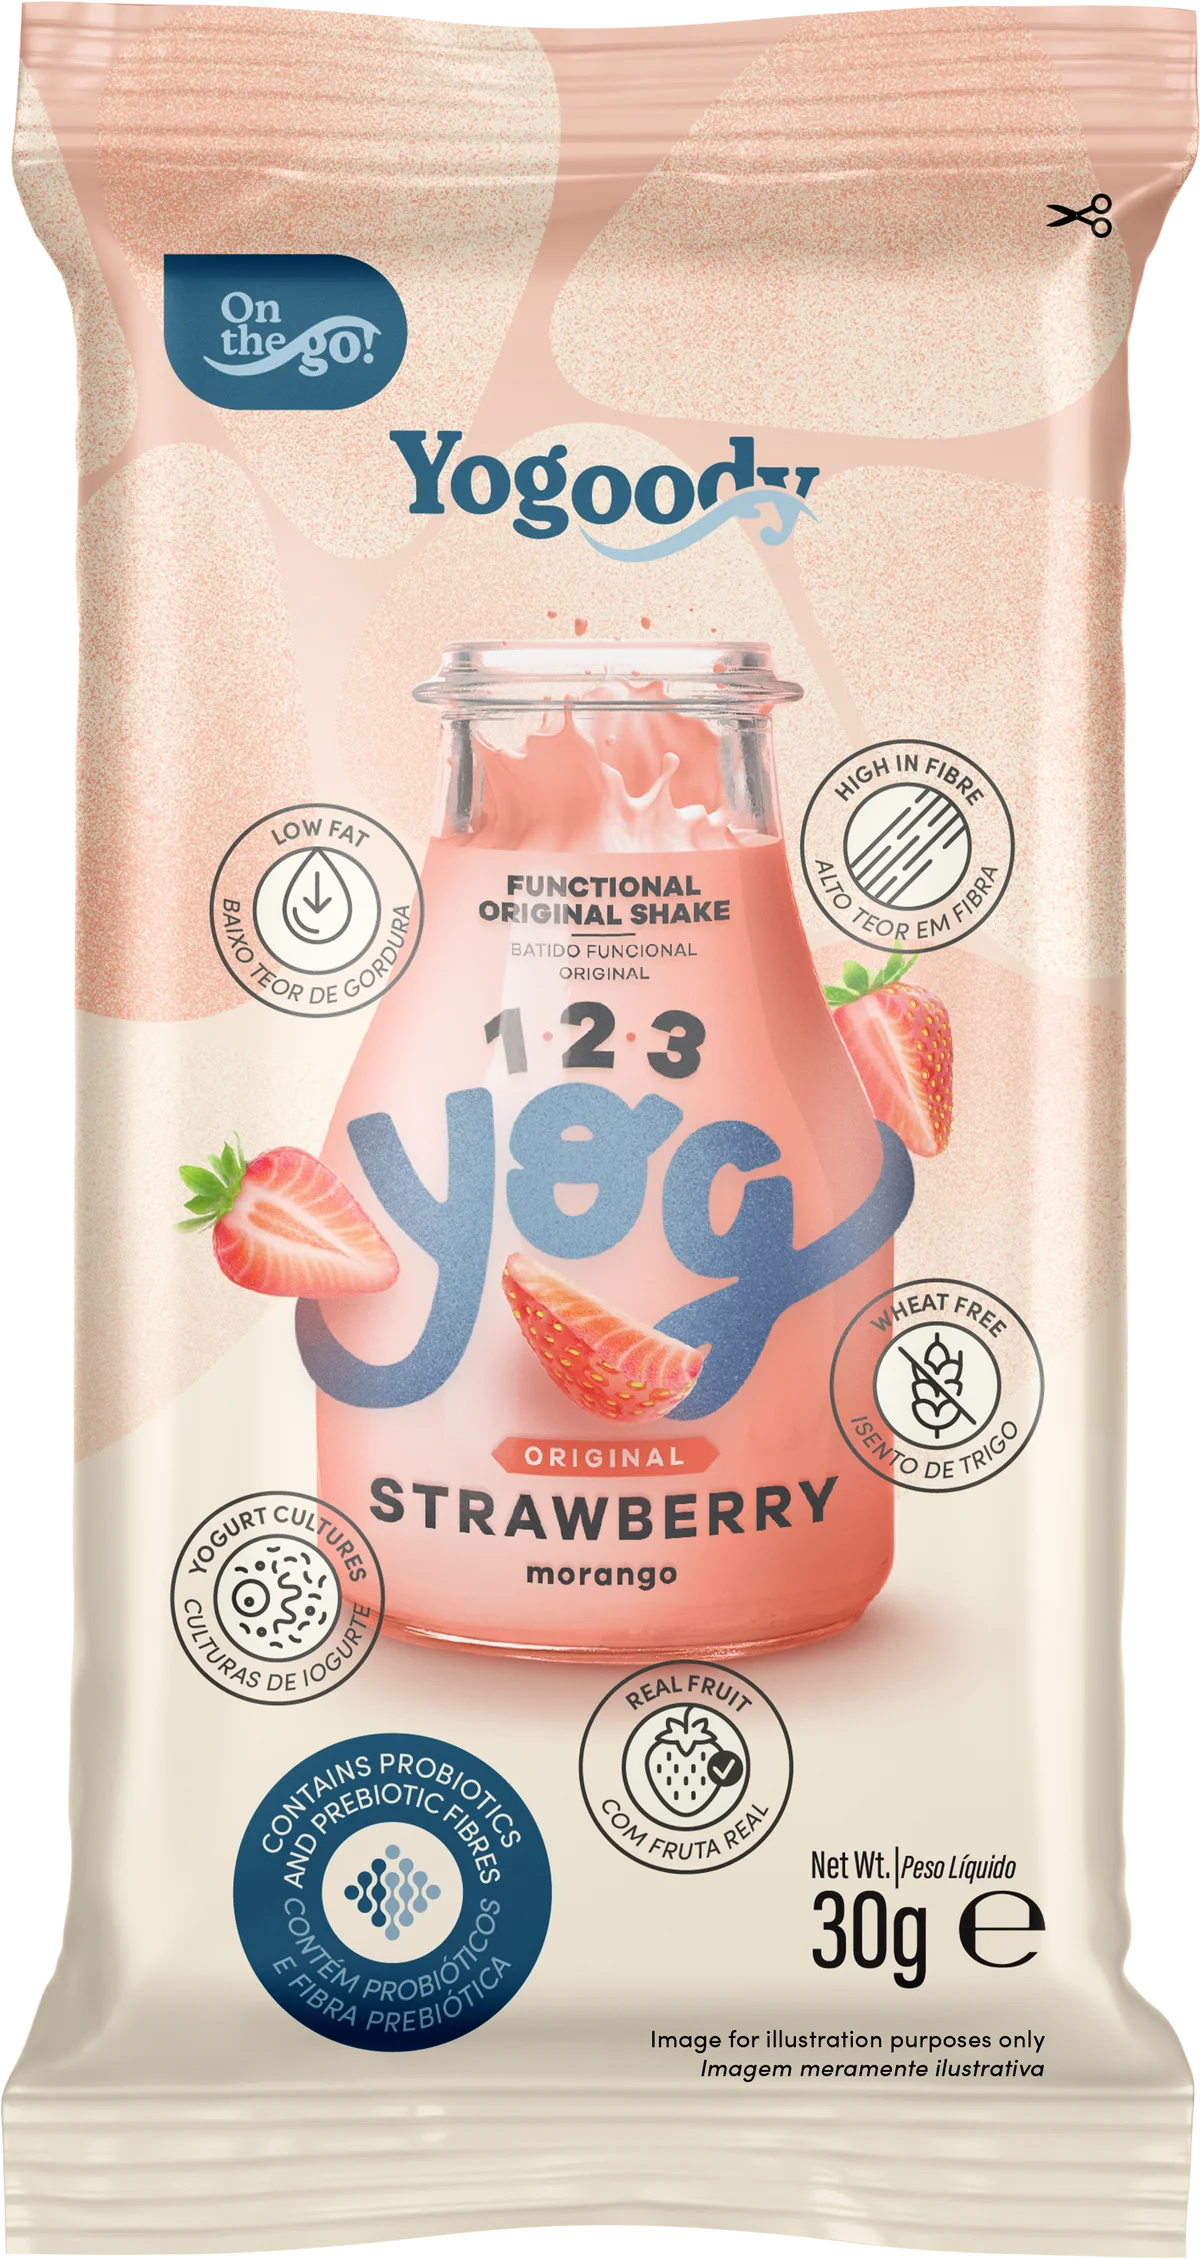 Welcome Pack - 1.2.3. YOG Original Strawberry and Wild Berry Flavoured Shakes (10 x 30g sachets + FREE shaker)